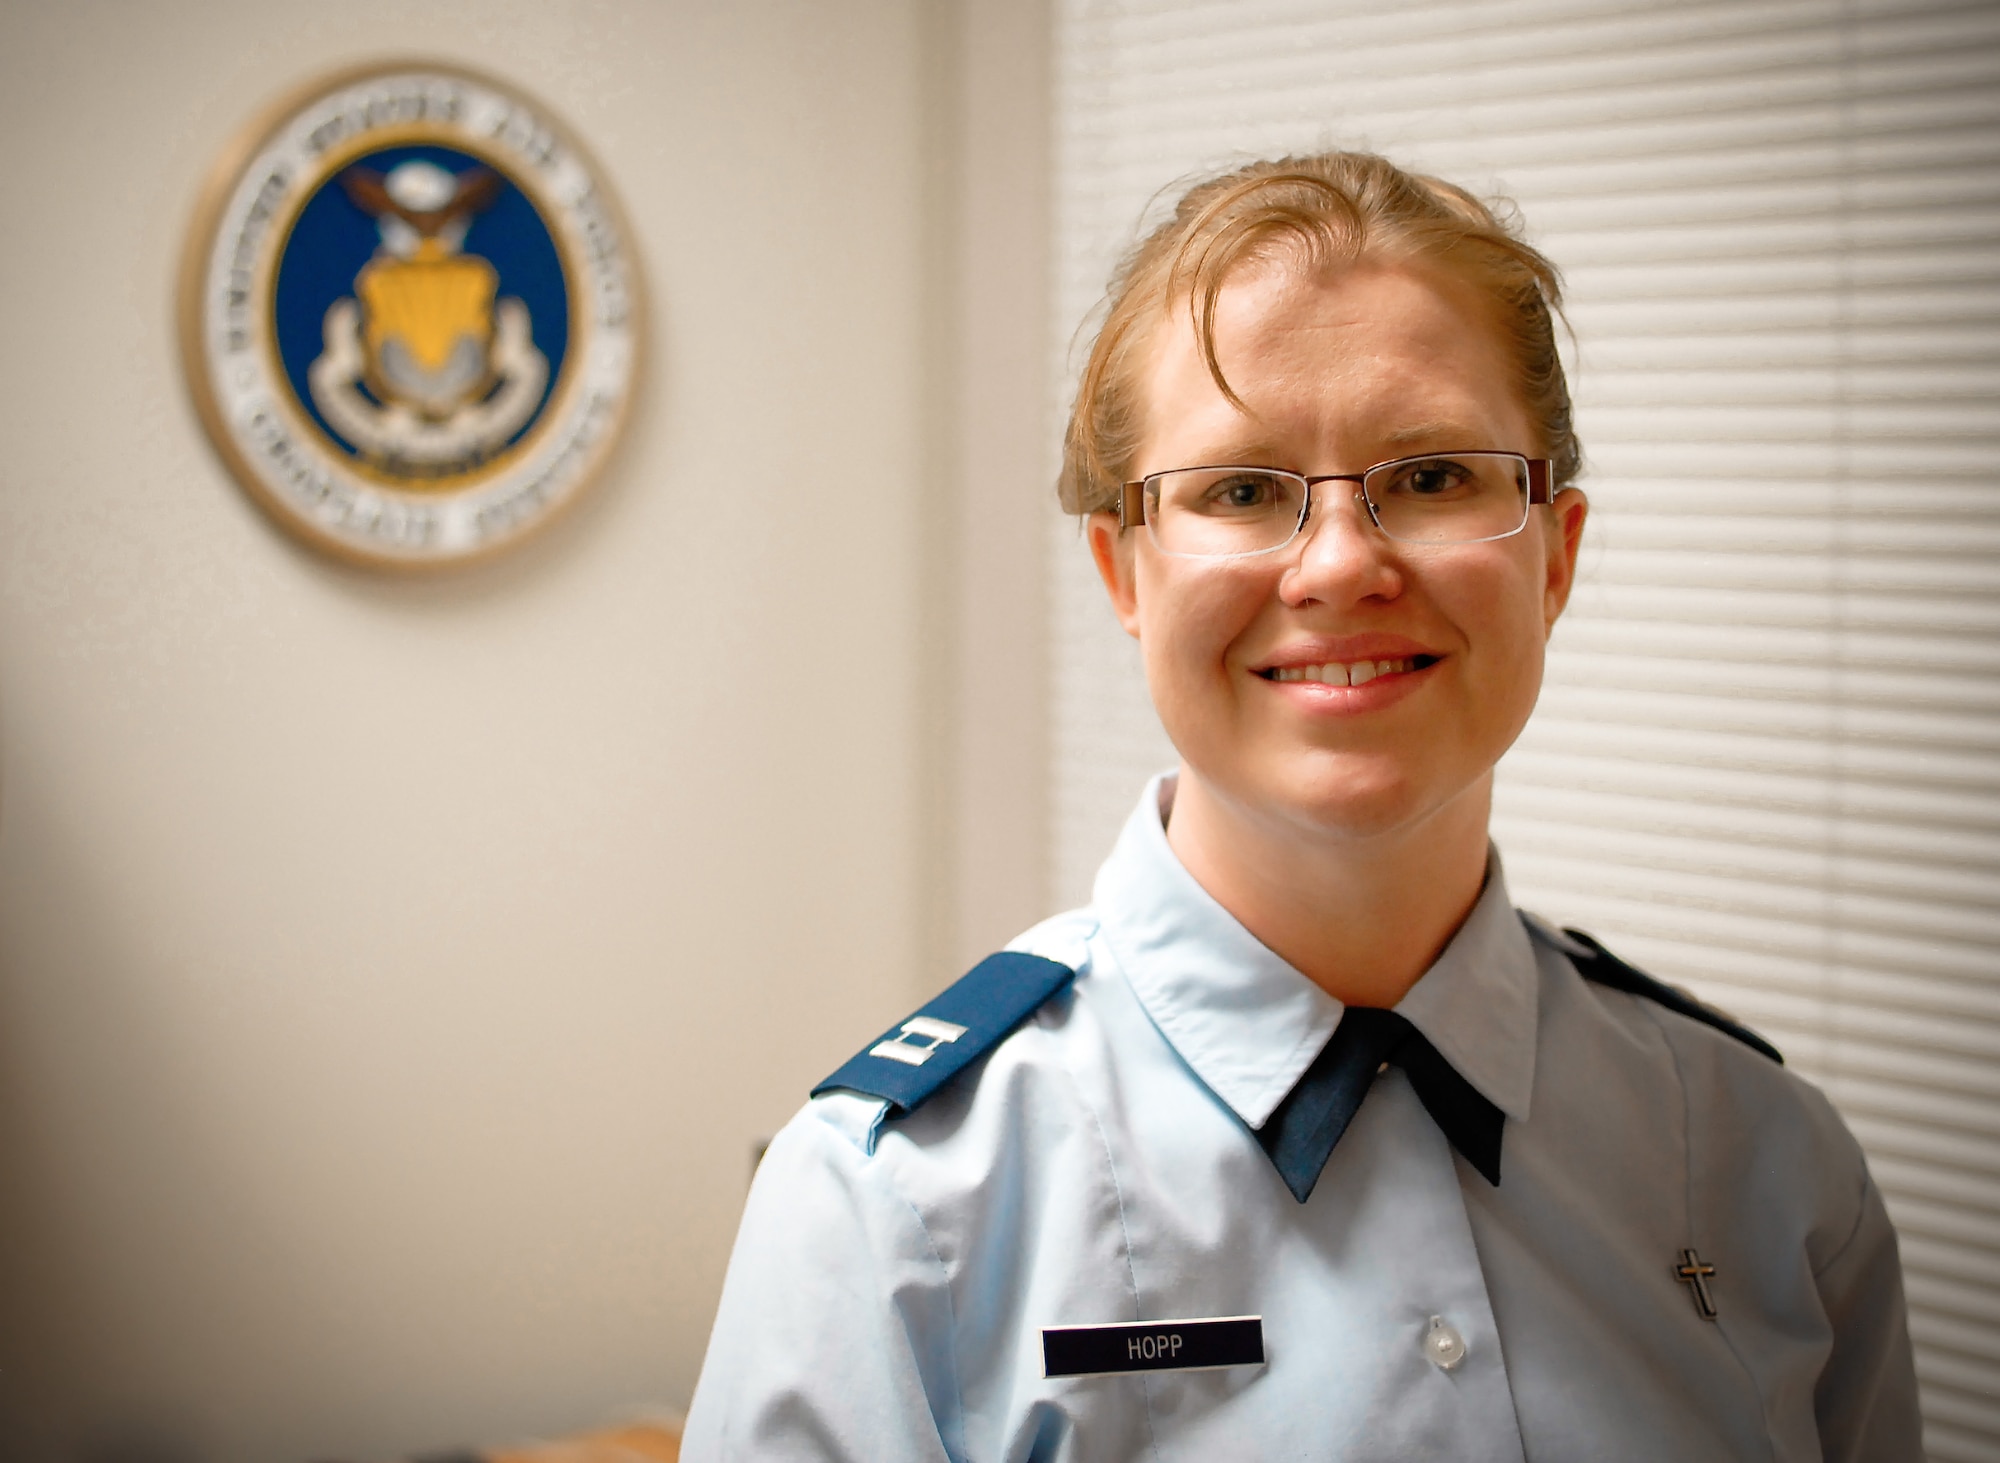 U.S. Air Force Chaplain (Capt.) Kristi L. Hopp serves as a chaplain at the 182nd Airlift Wing in Peoria, Ill., pictured May 5, 2014. Hopp received ordination as a United Methodist Church minister June 6, 2014, after completing an 8-year process of education and evaluation. She first became interested in the military during a Veterans Affairs hospital internship. “The stressors that we all are under in the Guard and being deployed are different. And yeah, sometimes we come back wounded, but then that’s kind of what war does,” she said. “It might not always wound us on the outside, but it can wound us on the inside. And so, it’s a very rewarding ministry to be able to serve here.” (U.S. Air National Guard photo illustration by Staff Sgt. Lealan Buehrer/Released)